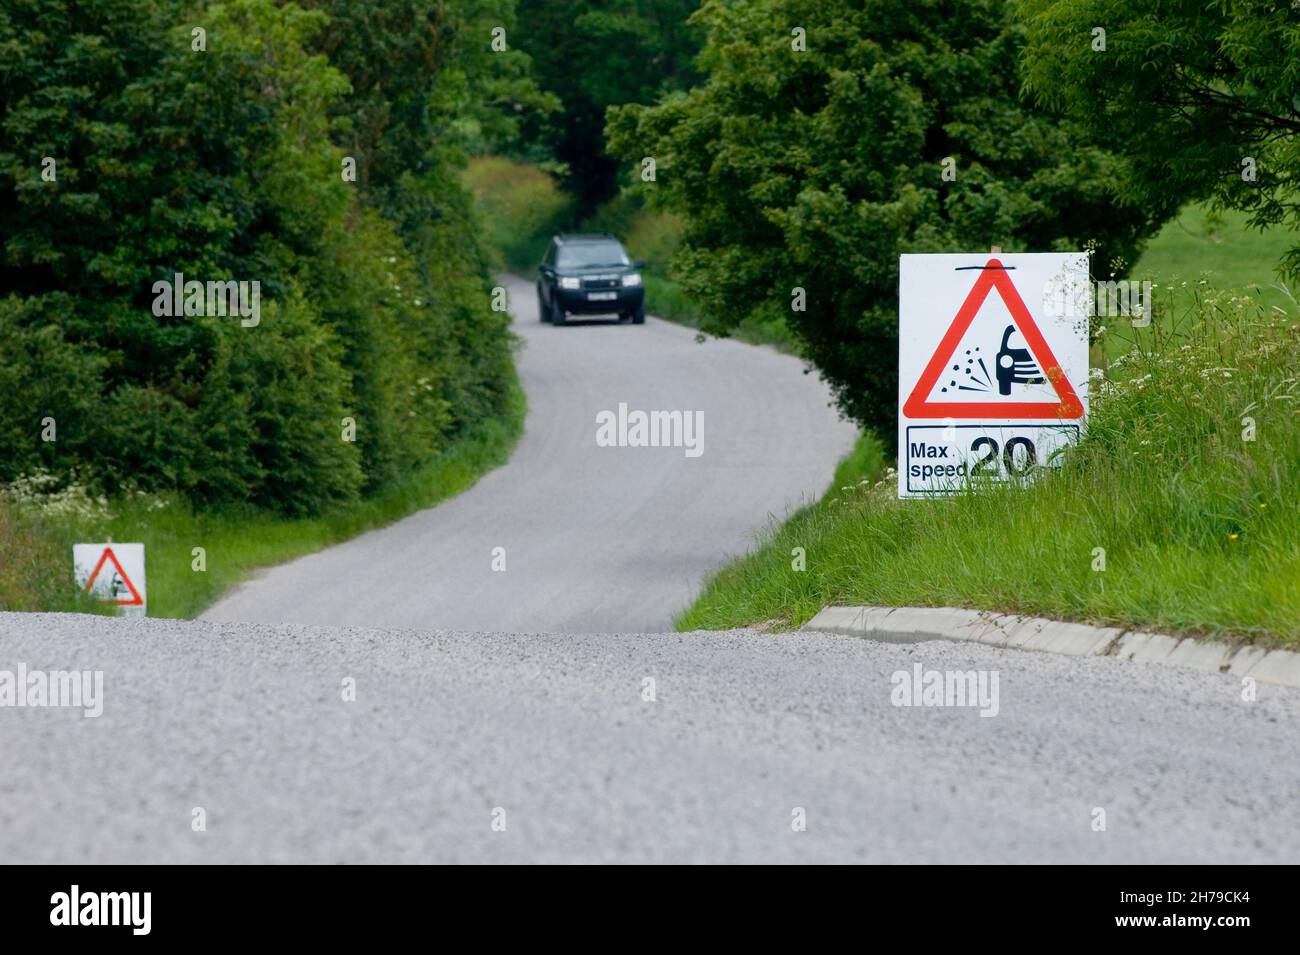 A passenger car approaches a maximum speed 20mph sign on a country B road covered in fresh loose stone chippings, Leicestershire, England, UK. Stock Photo